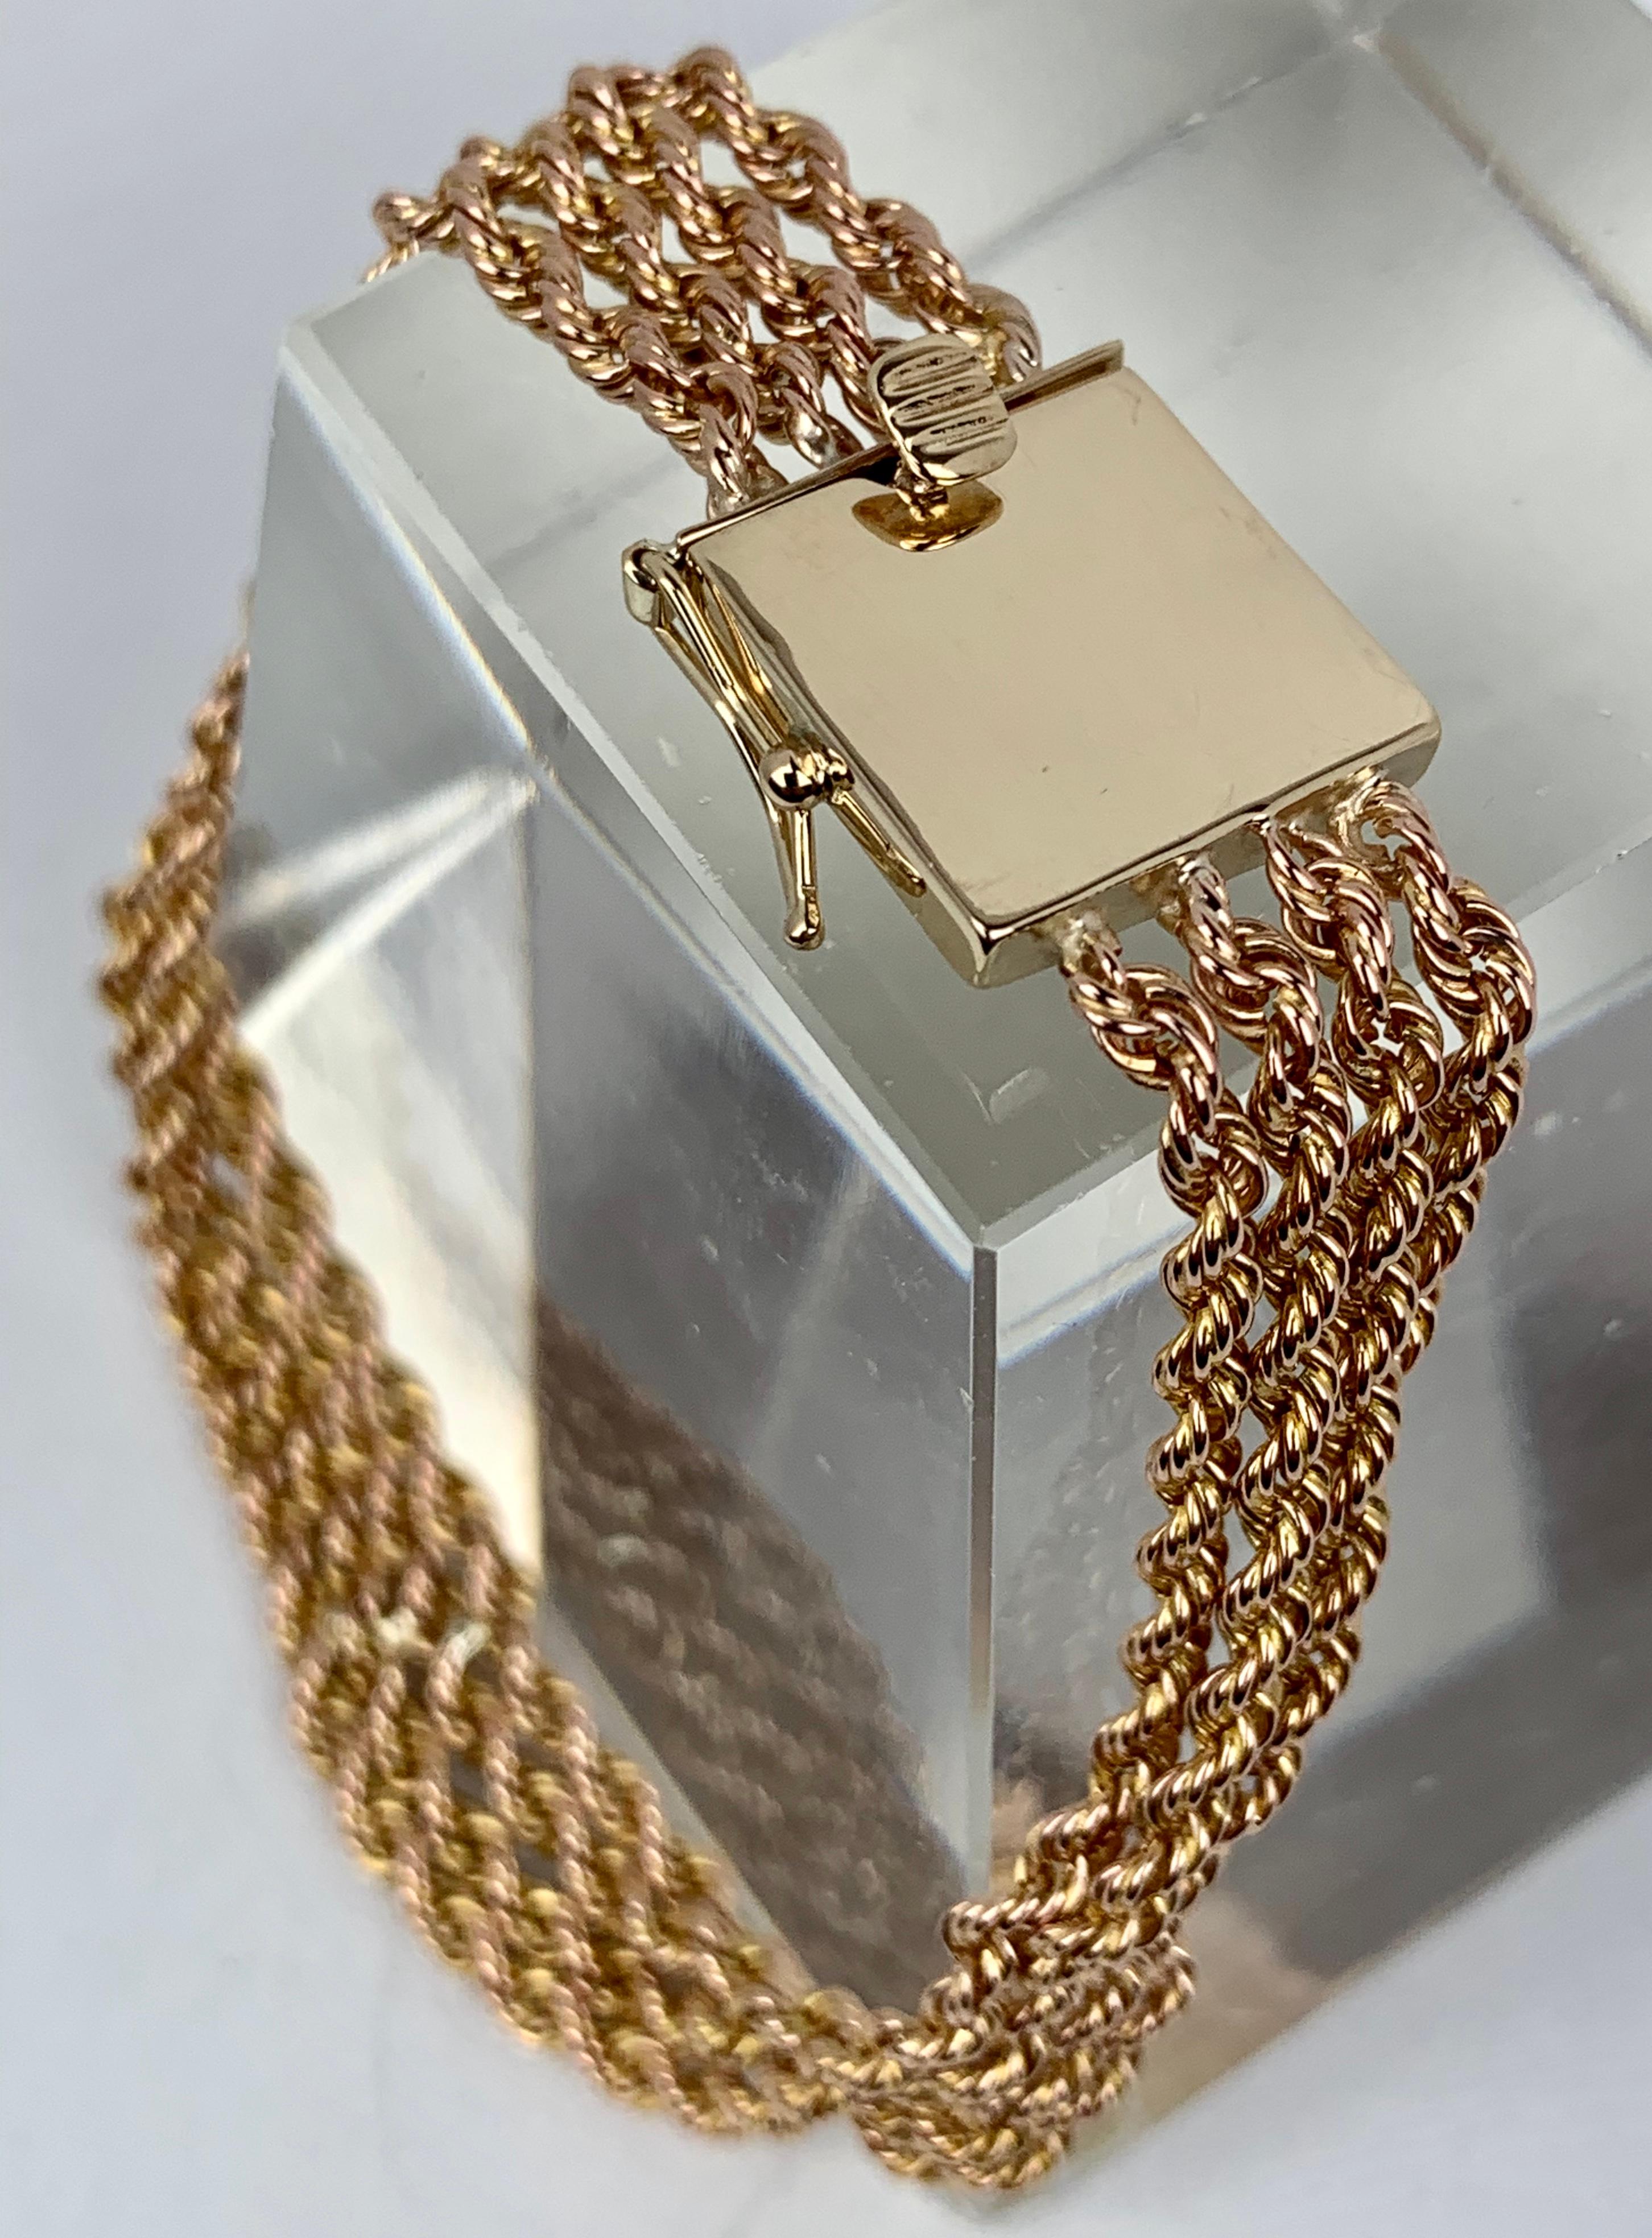 1950's chain bracelet in 14k yellow gold.  The four rope turned strands terminate in a square gold lock waiting impatiently to be monogrammed.  The thumb press and release lock is aided by a figure eight safety catch.  There are a few soft dimples